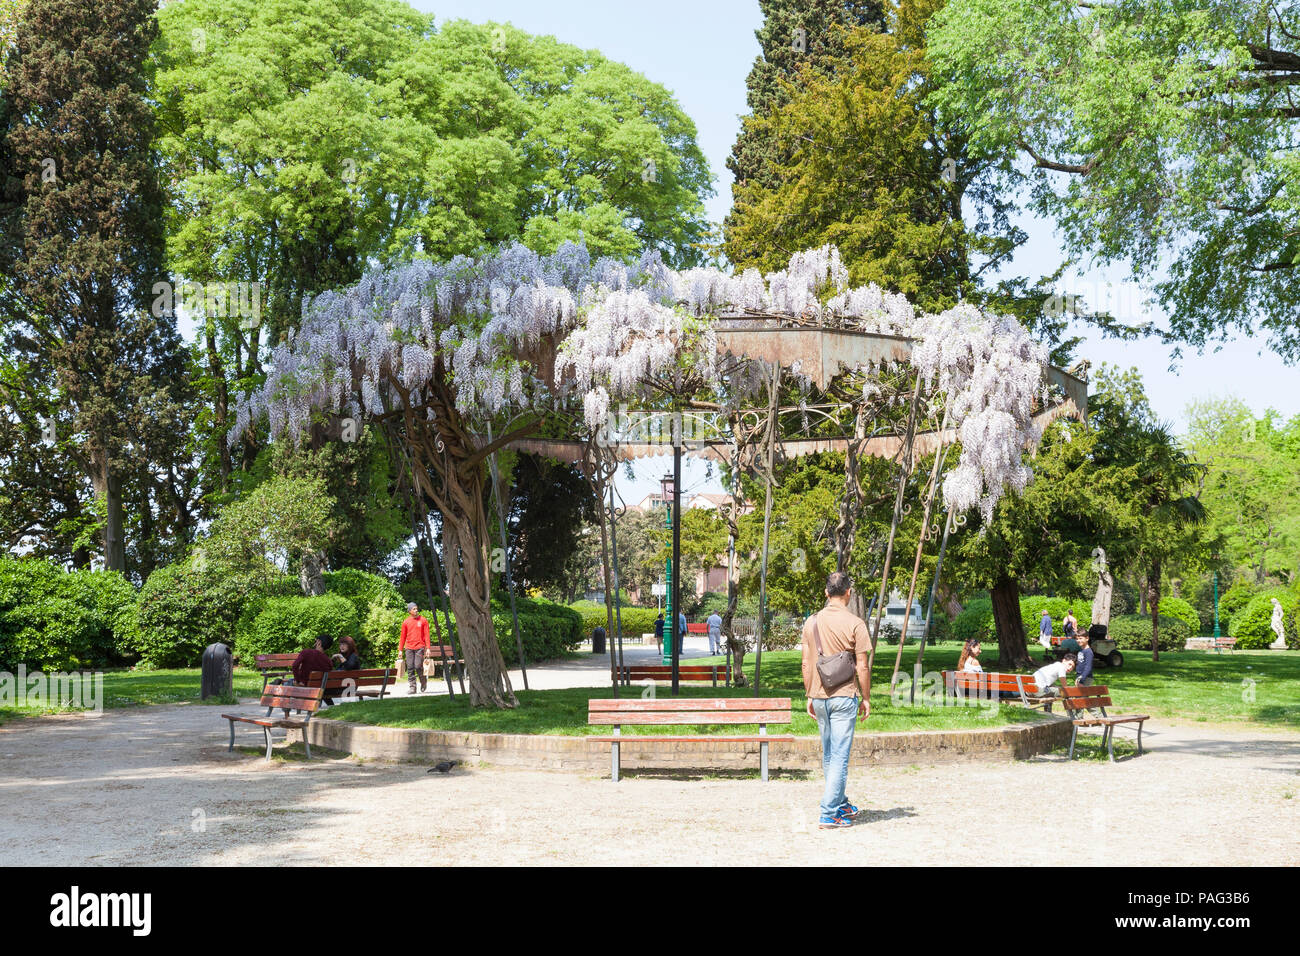 Giardini Pubblici or Public Gradens, Castello, Venice, Veneto, Italy, in spring  with a view of the old bandstand covered in wisteria flowers and peop Stock Photo